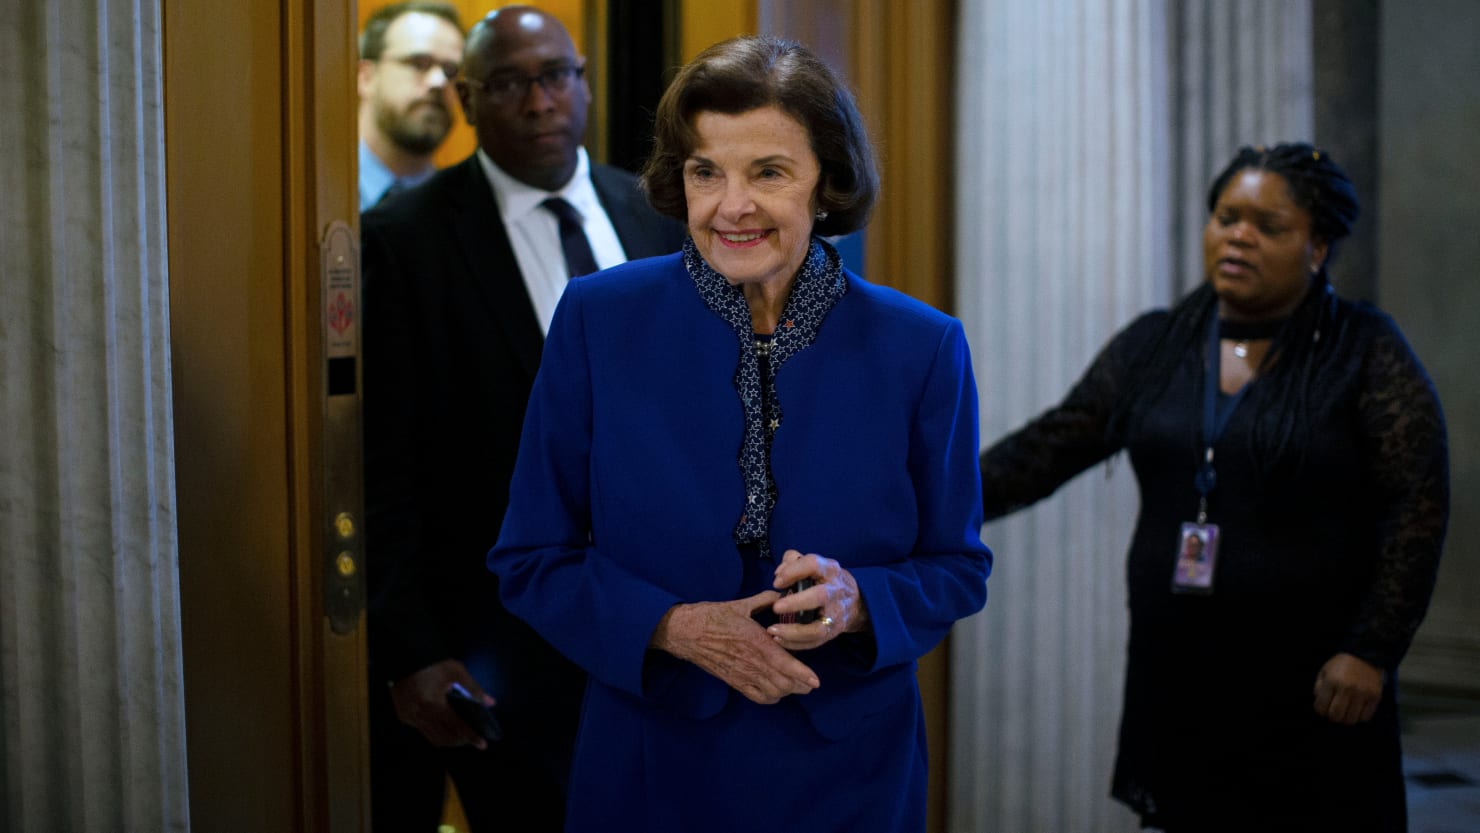 Dianne Feinstein En Route to Washington, D.C. After Three-Month Absence